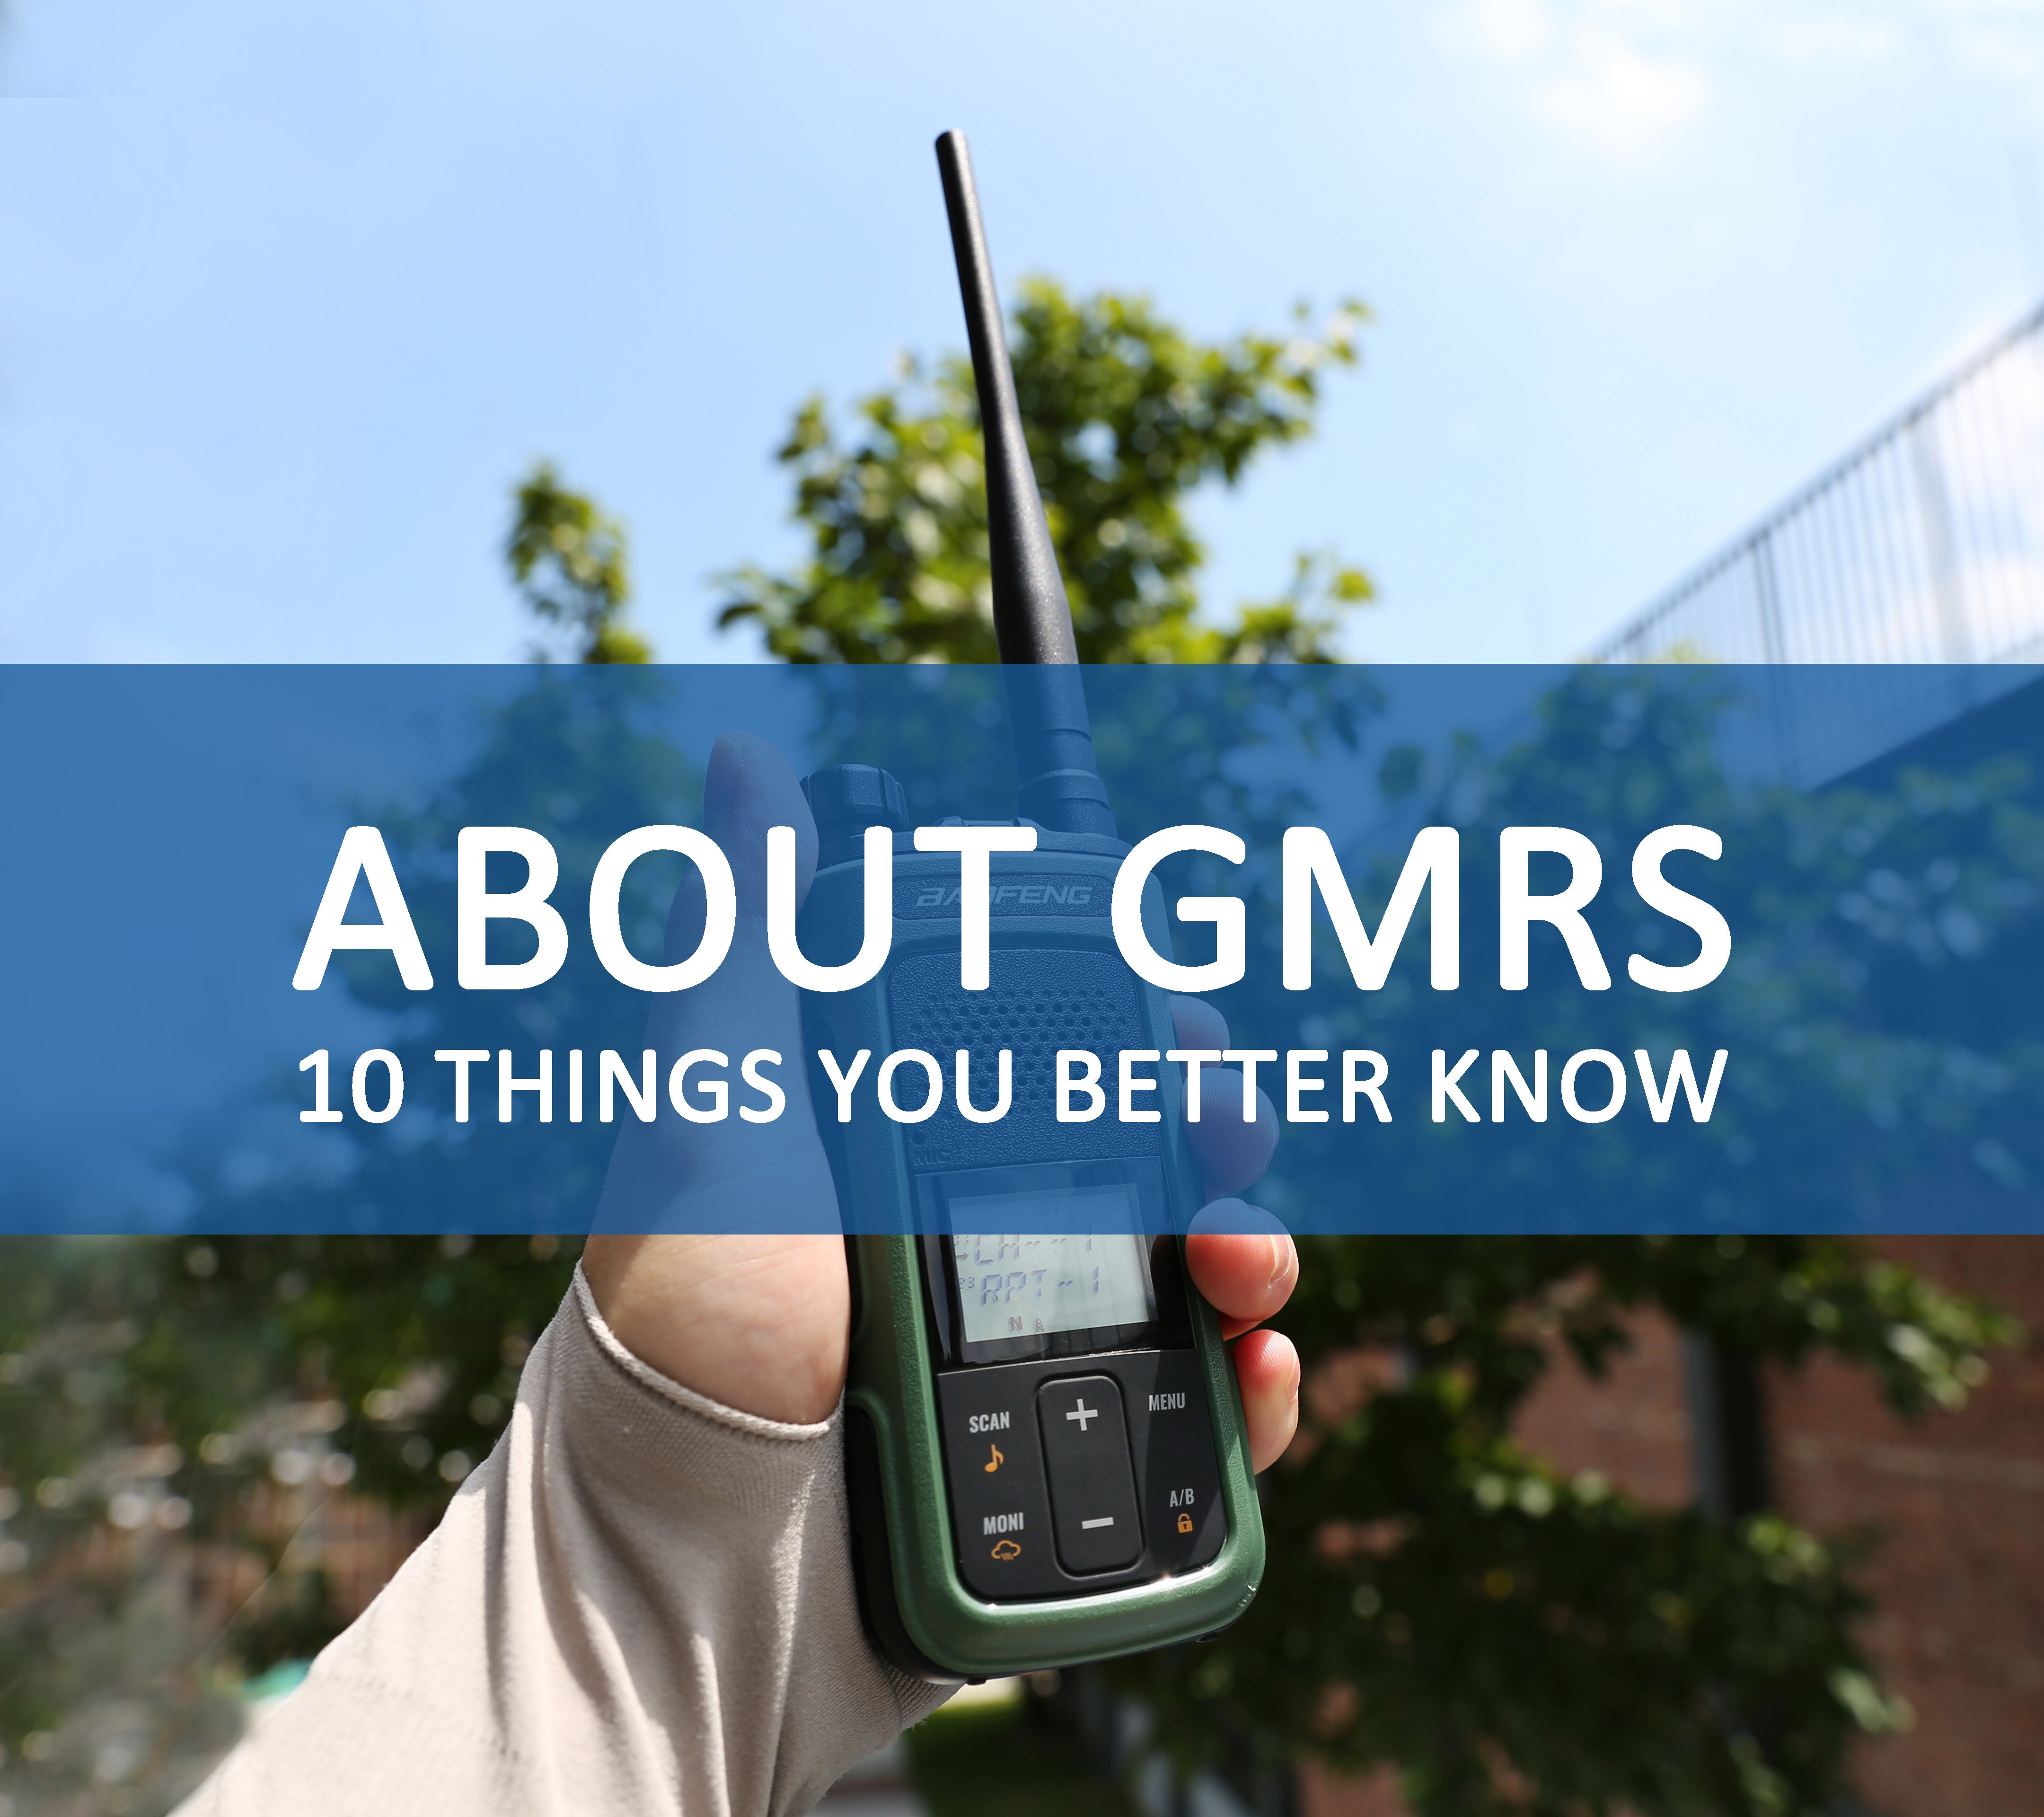 About GMRS, 10 Things You Better Know Baofeng